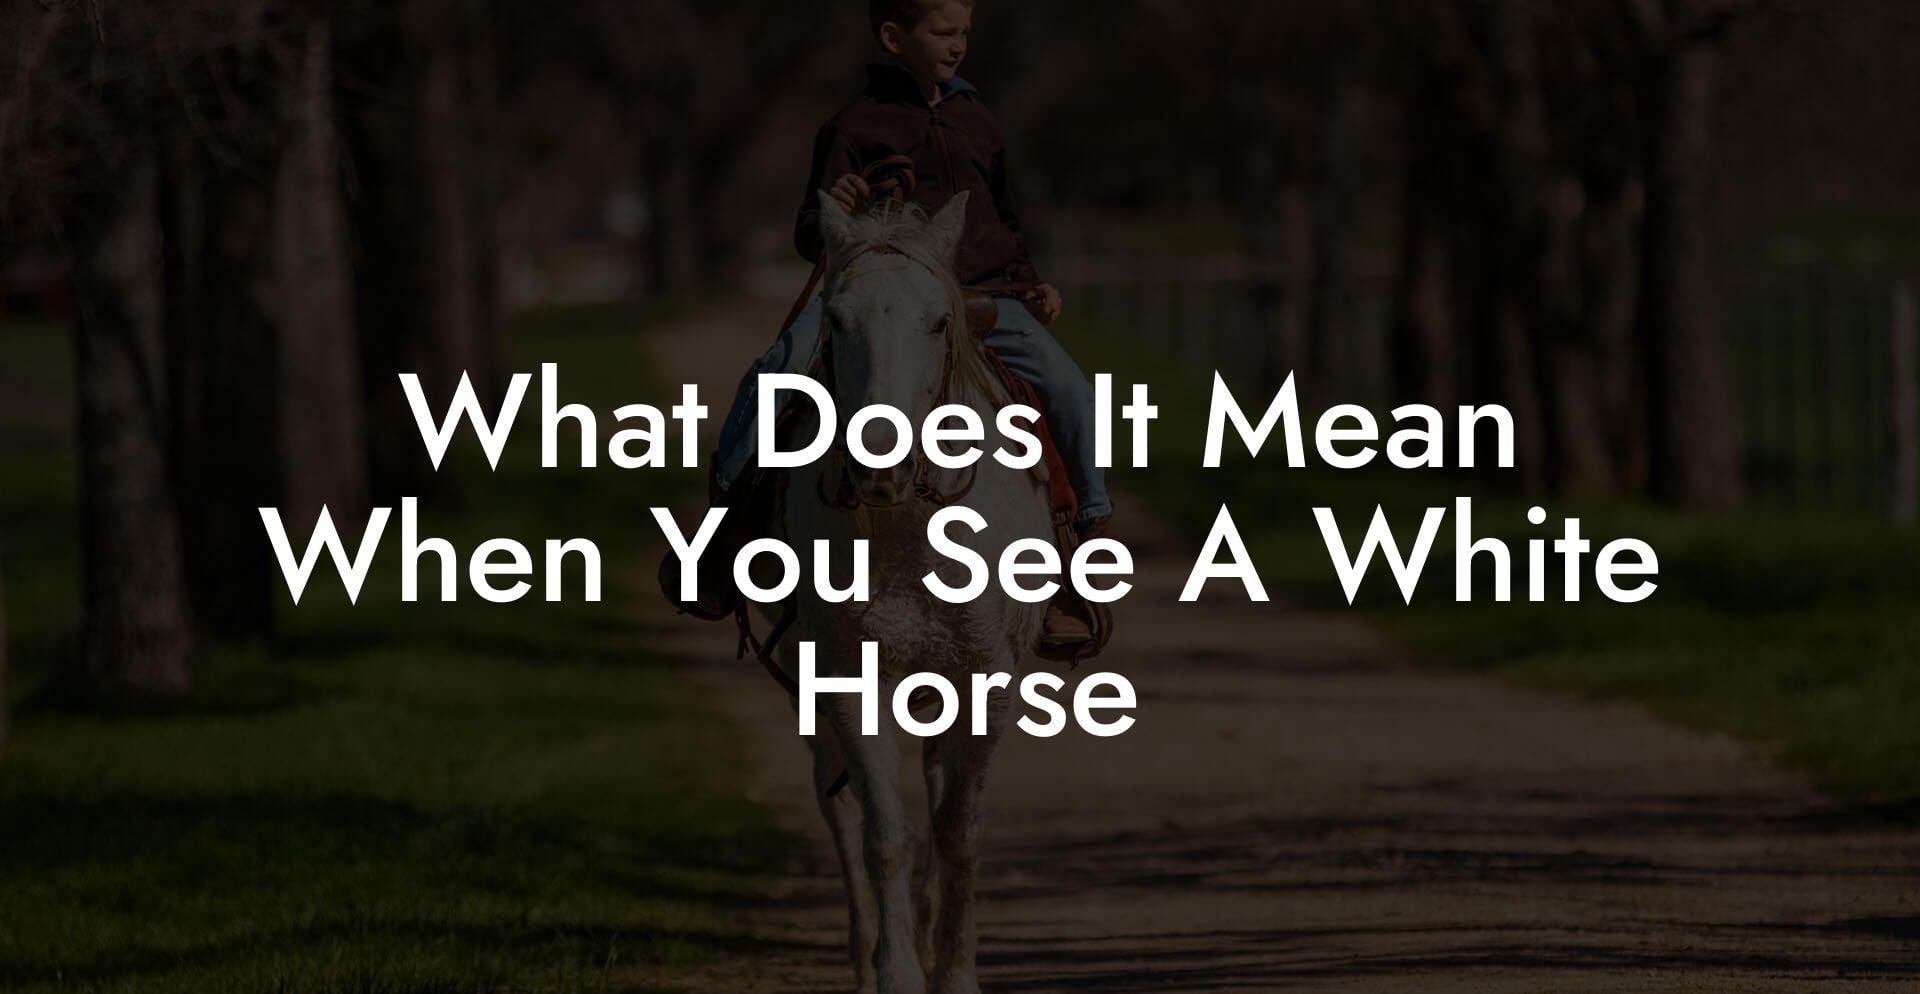 What Does It Mean When You See A White Horse